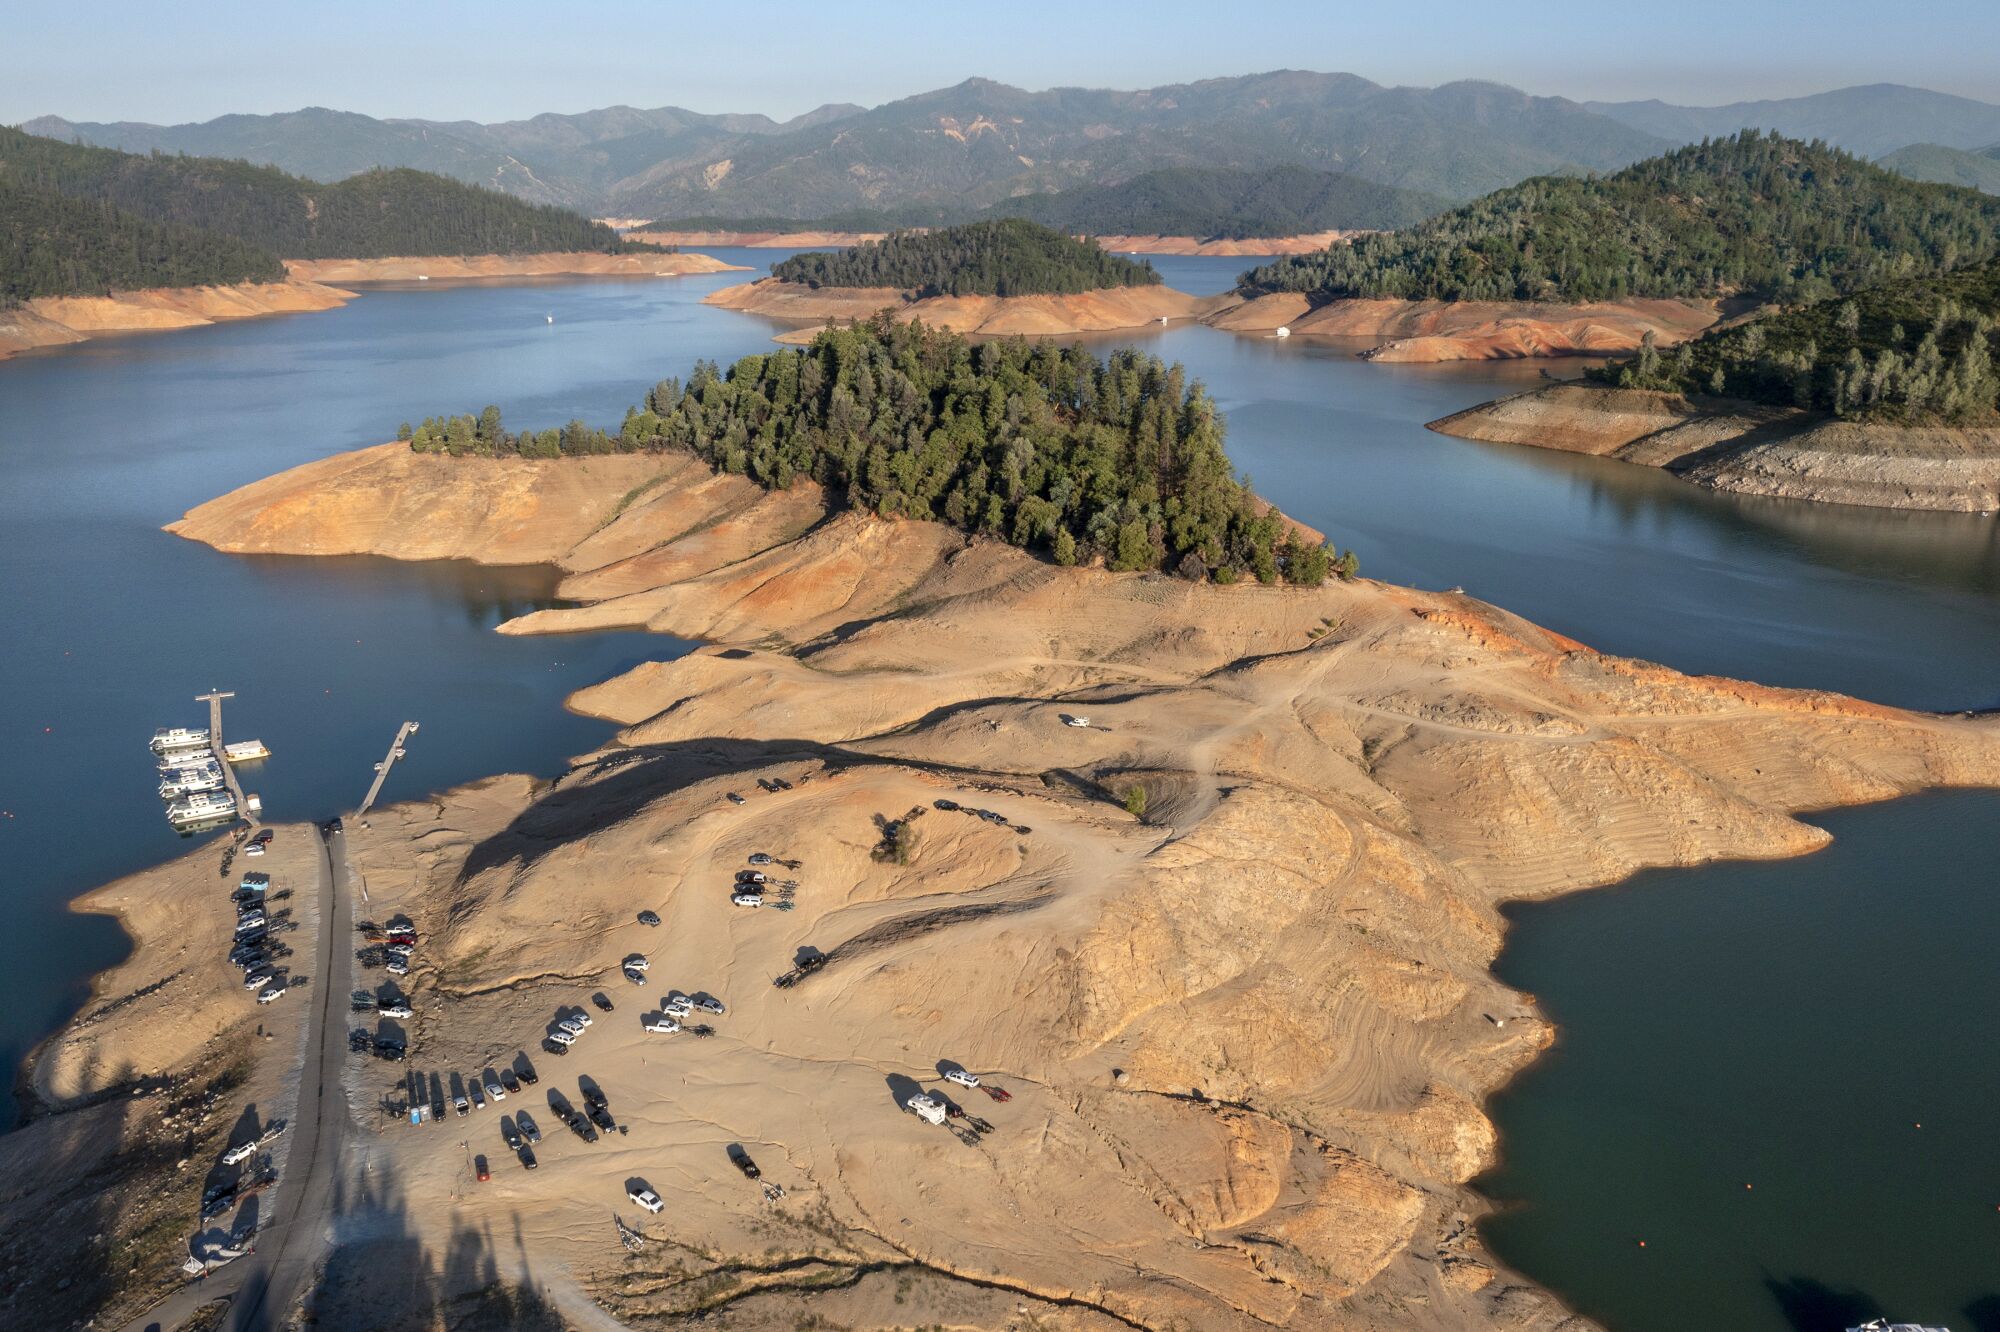 June 30: Low water levels at Lake Shasta show the drought's toll.